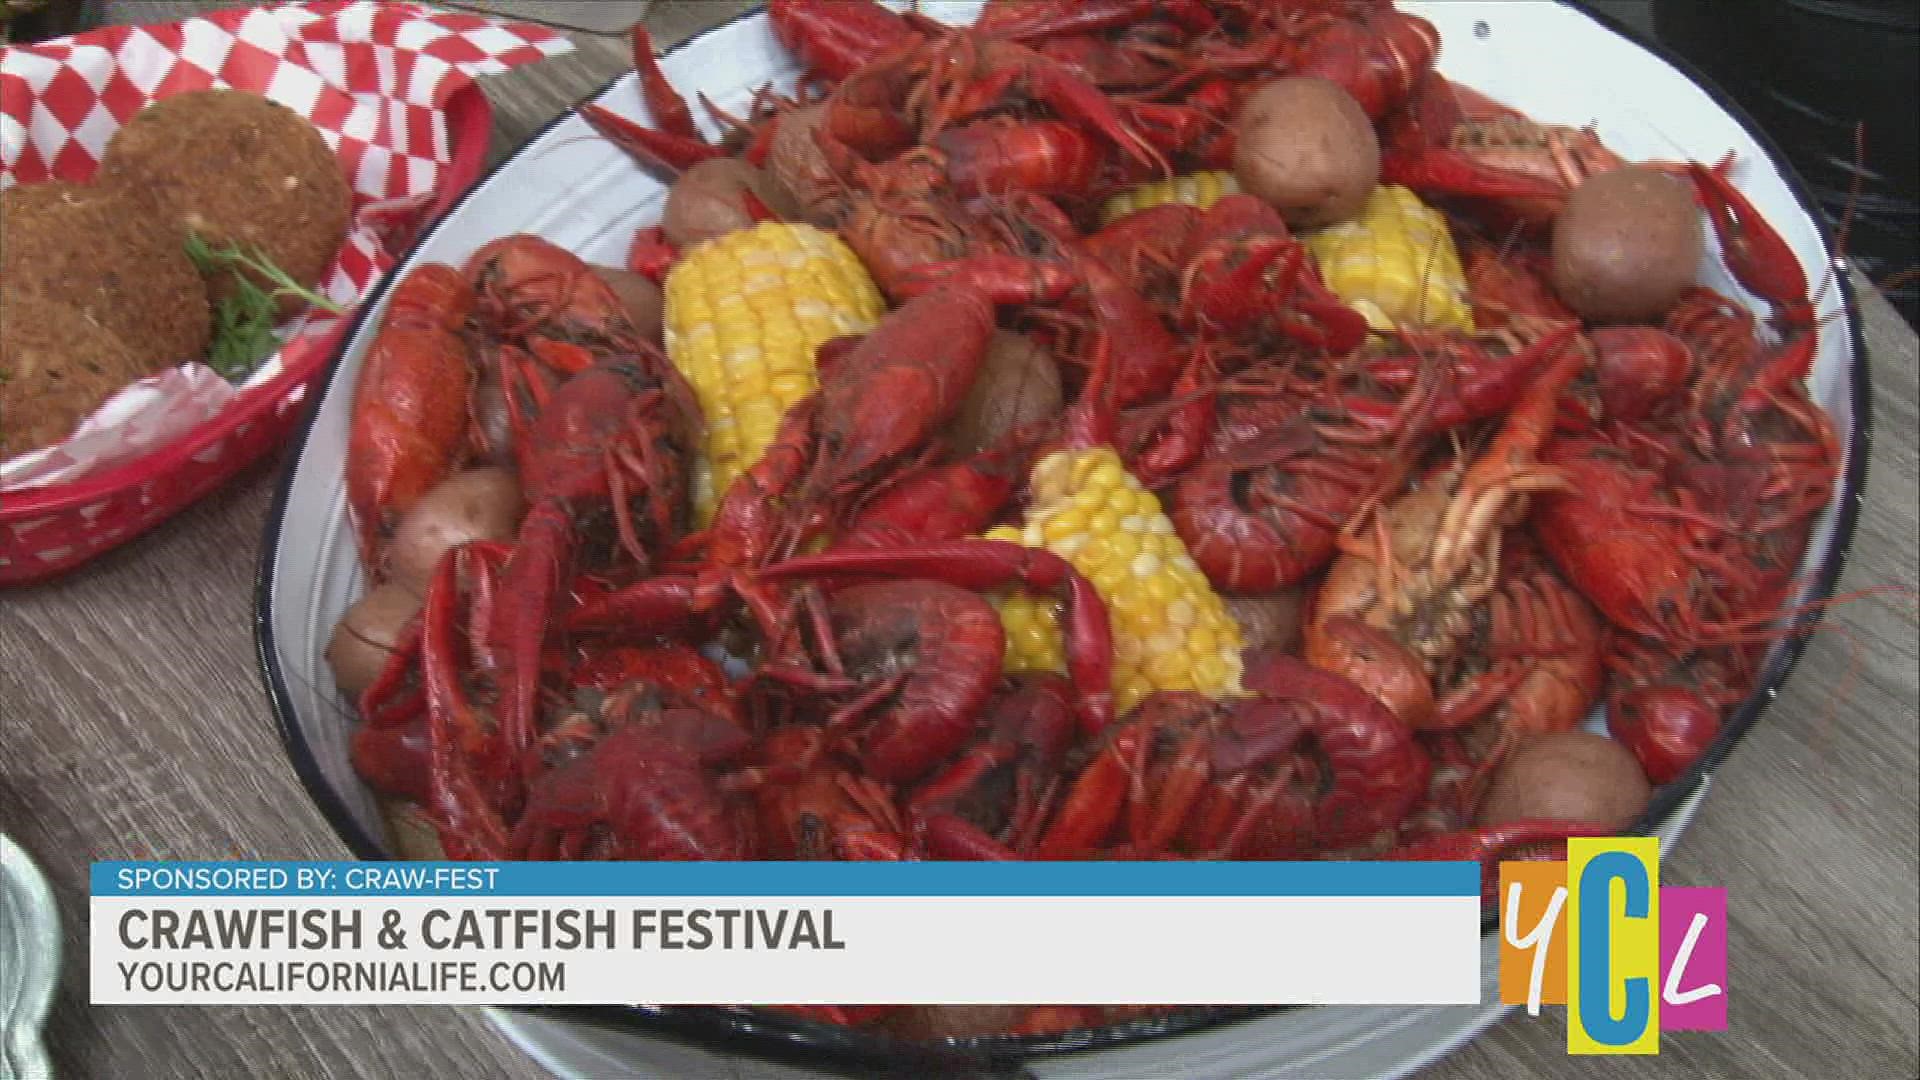 Celebrating over 12 years of good times, the Crawfish & Catfish Festival will take you from the "Bayou to Bourbon St." right here in Sacramento.